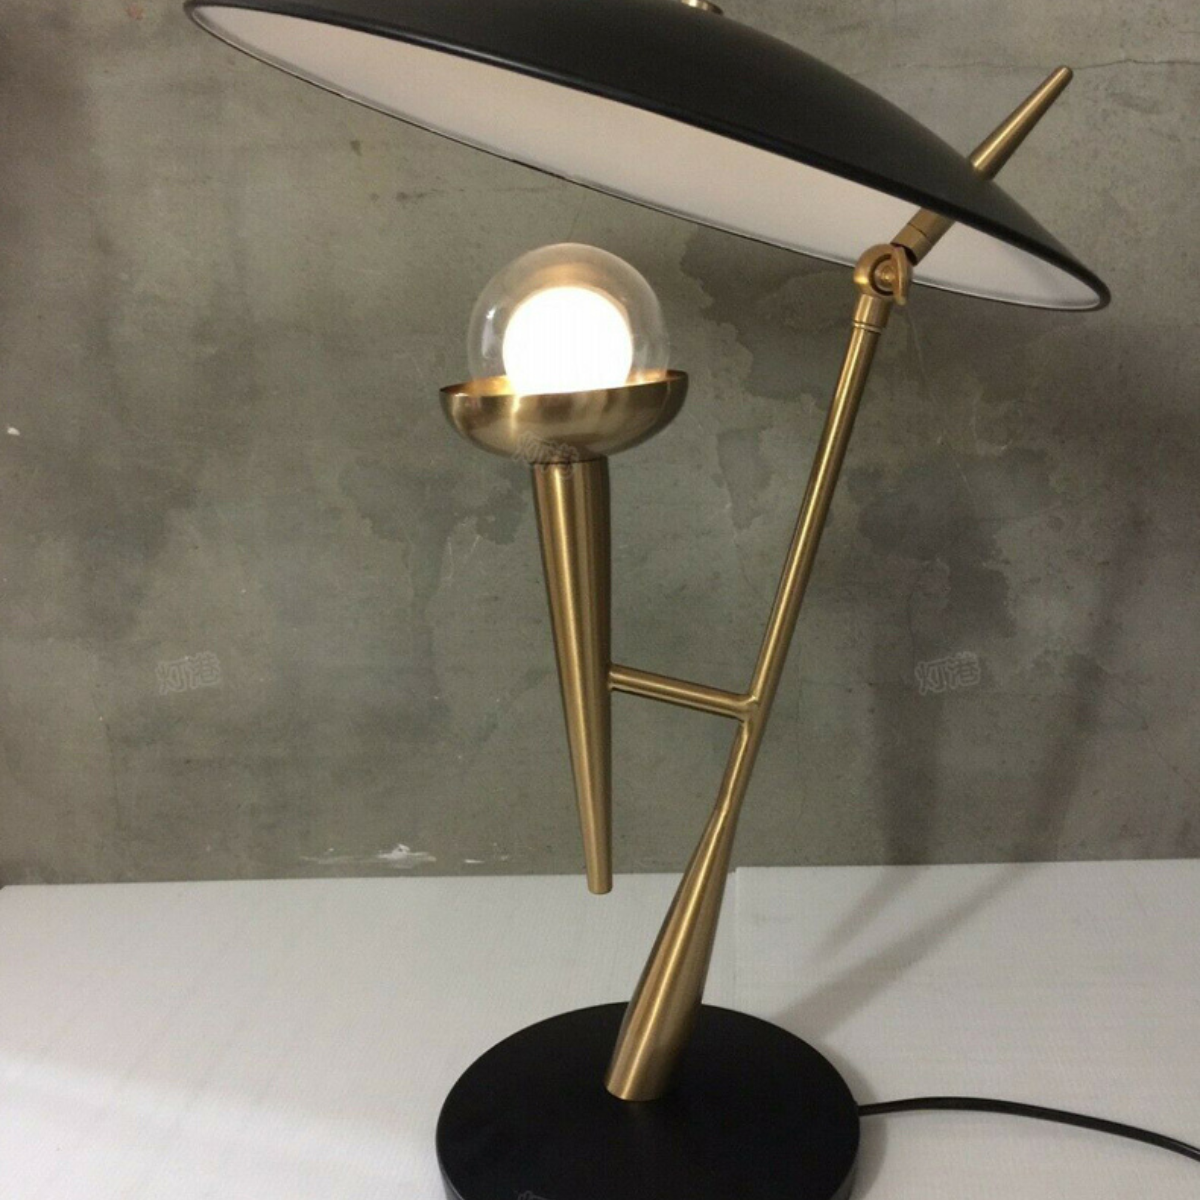 Lumino-Microphone-Shaped-Modern-Bedside-Table-Lamp-6